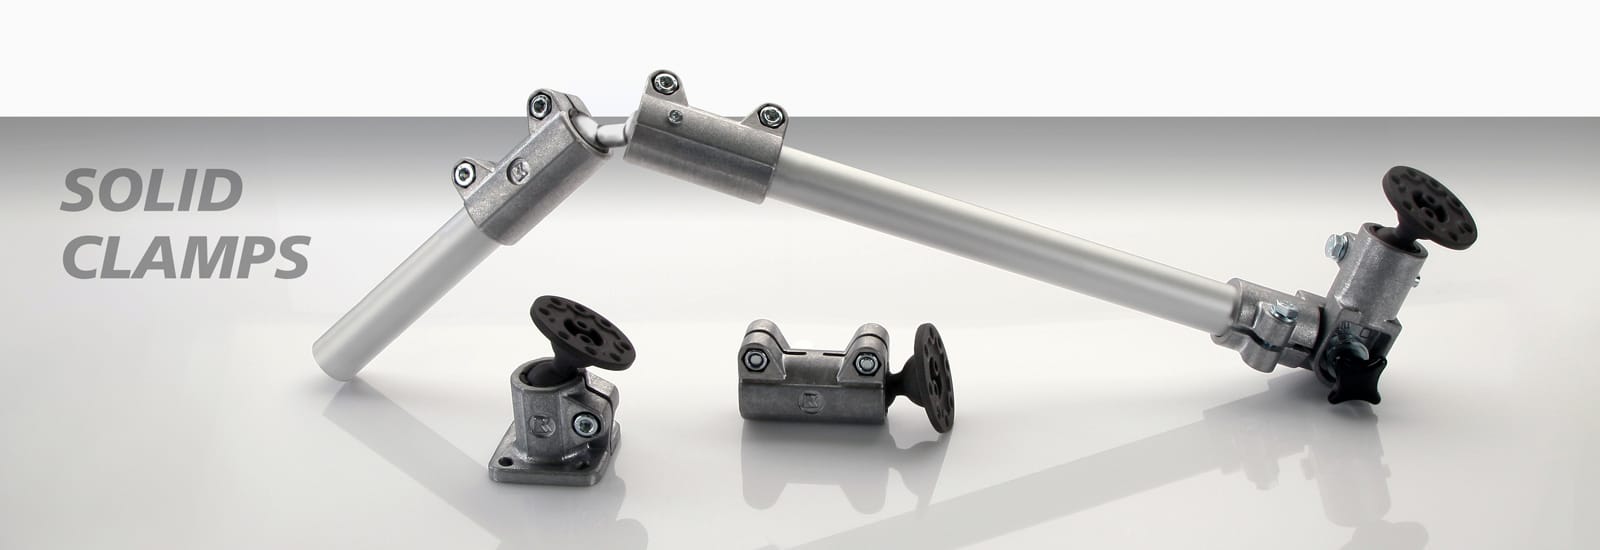 Solid Clamps with ball joint – four new models for even more flexibility